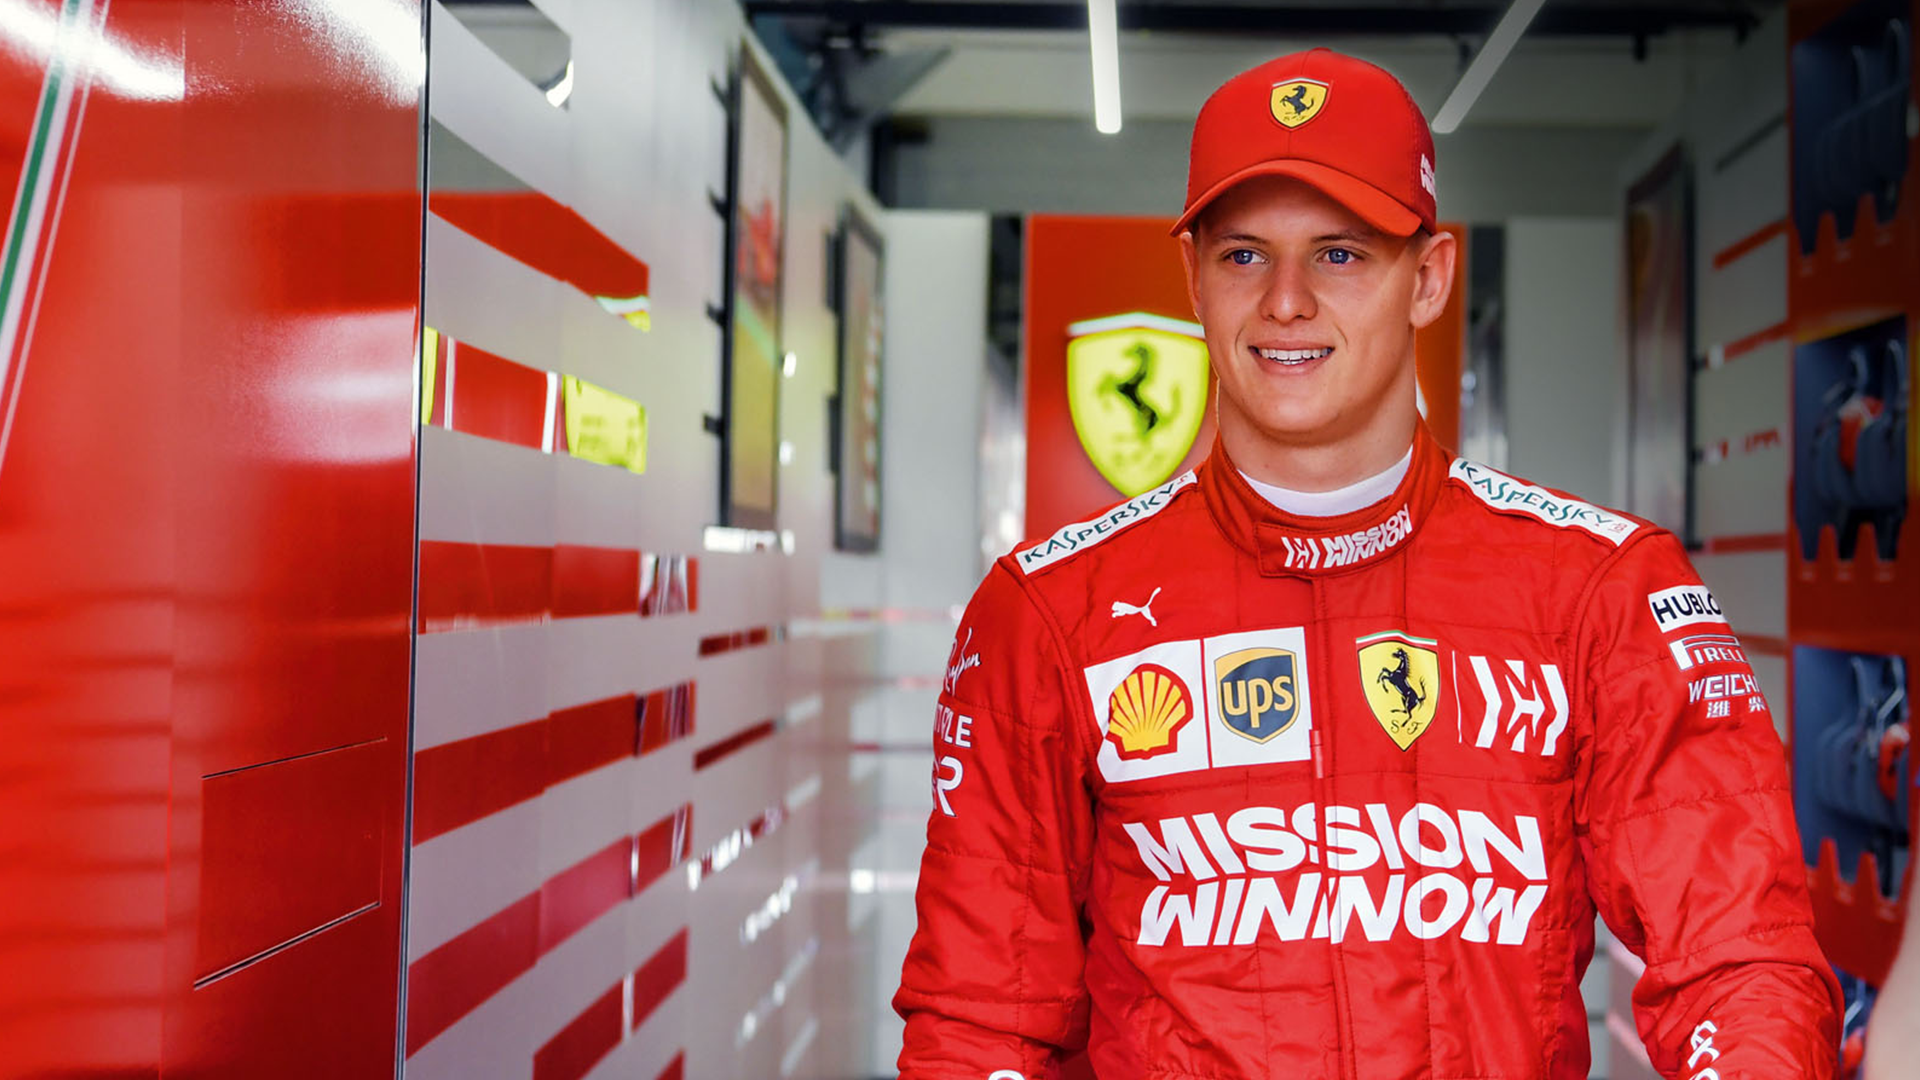 Mick Schumacher suited up for his Ferrari SF90 test drive at Bahrain in 2019. WIll we see a return of the Schumacher name to the F1 grid in 2021?